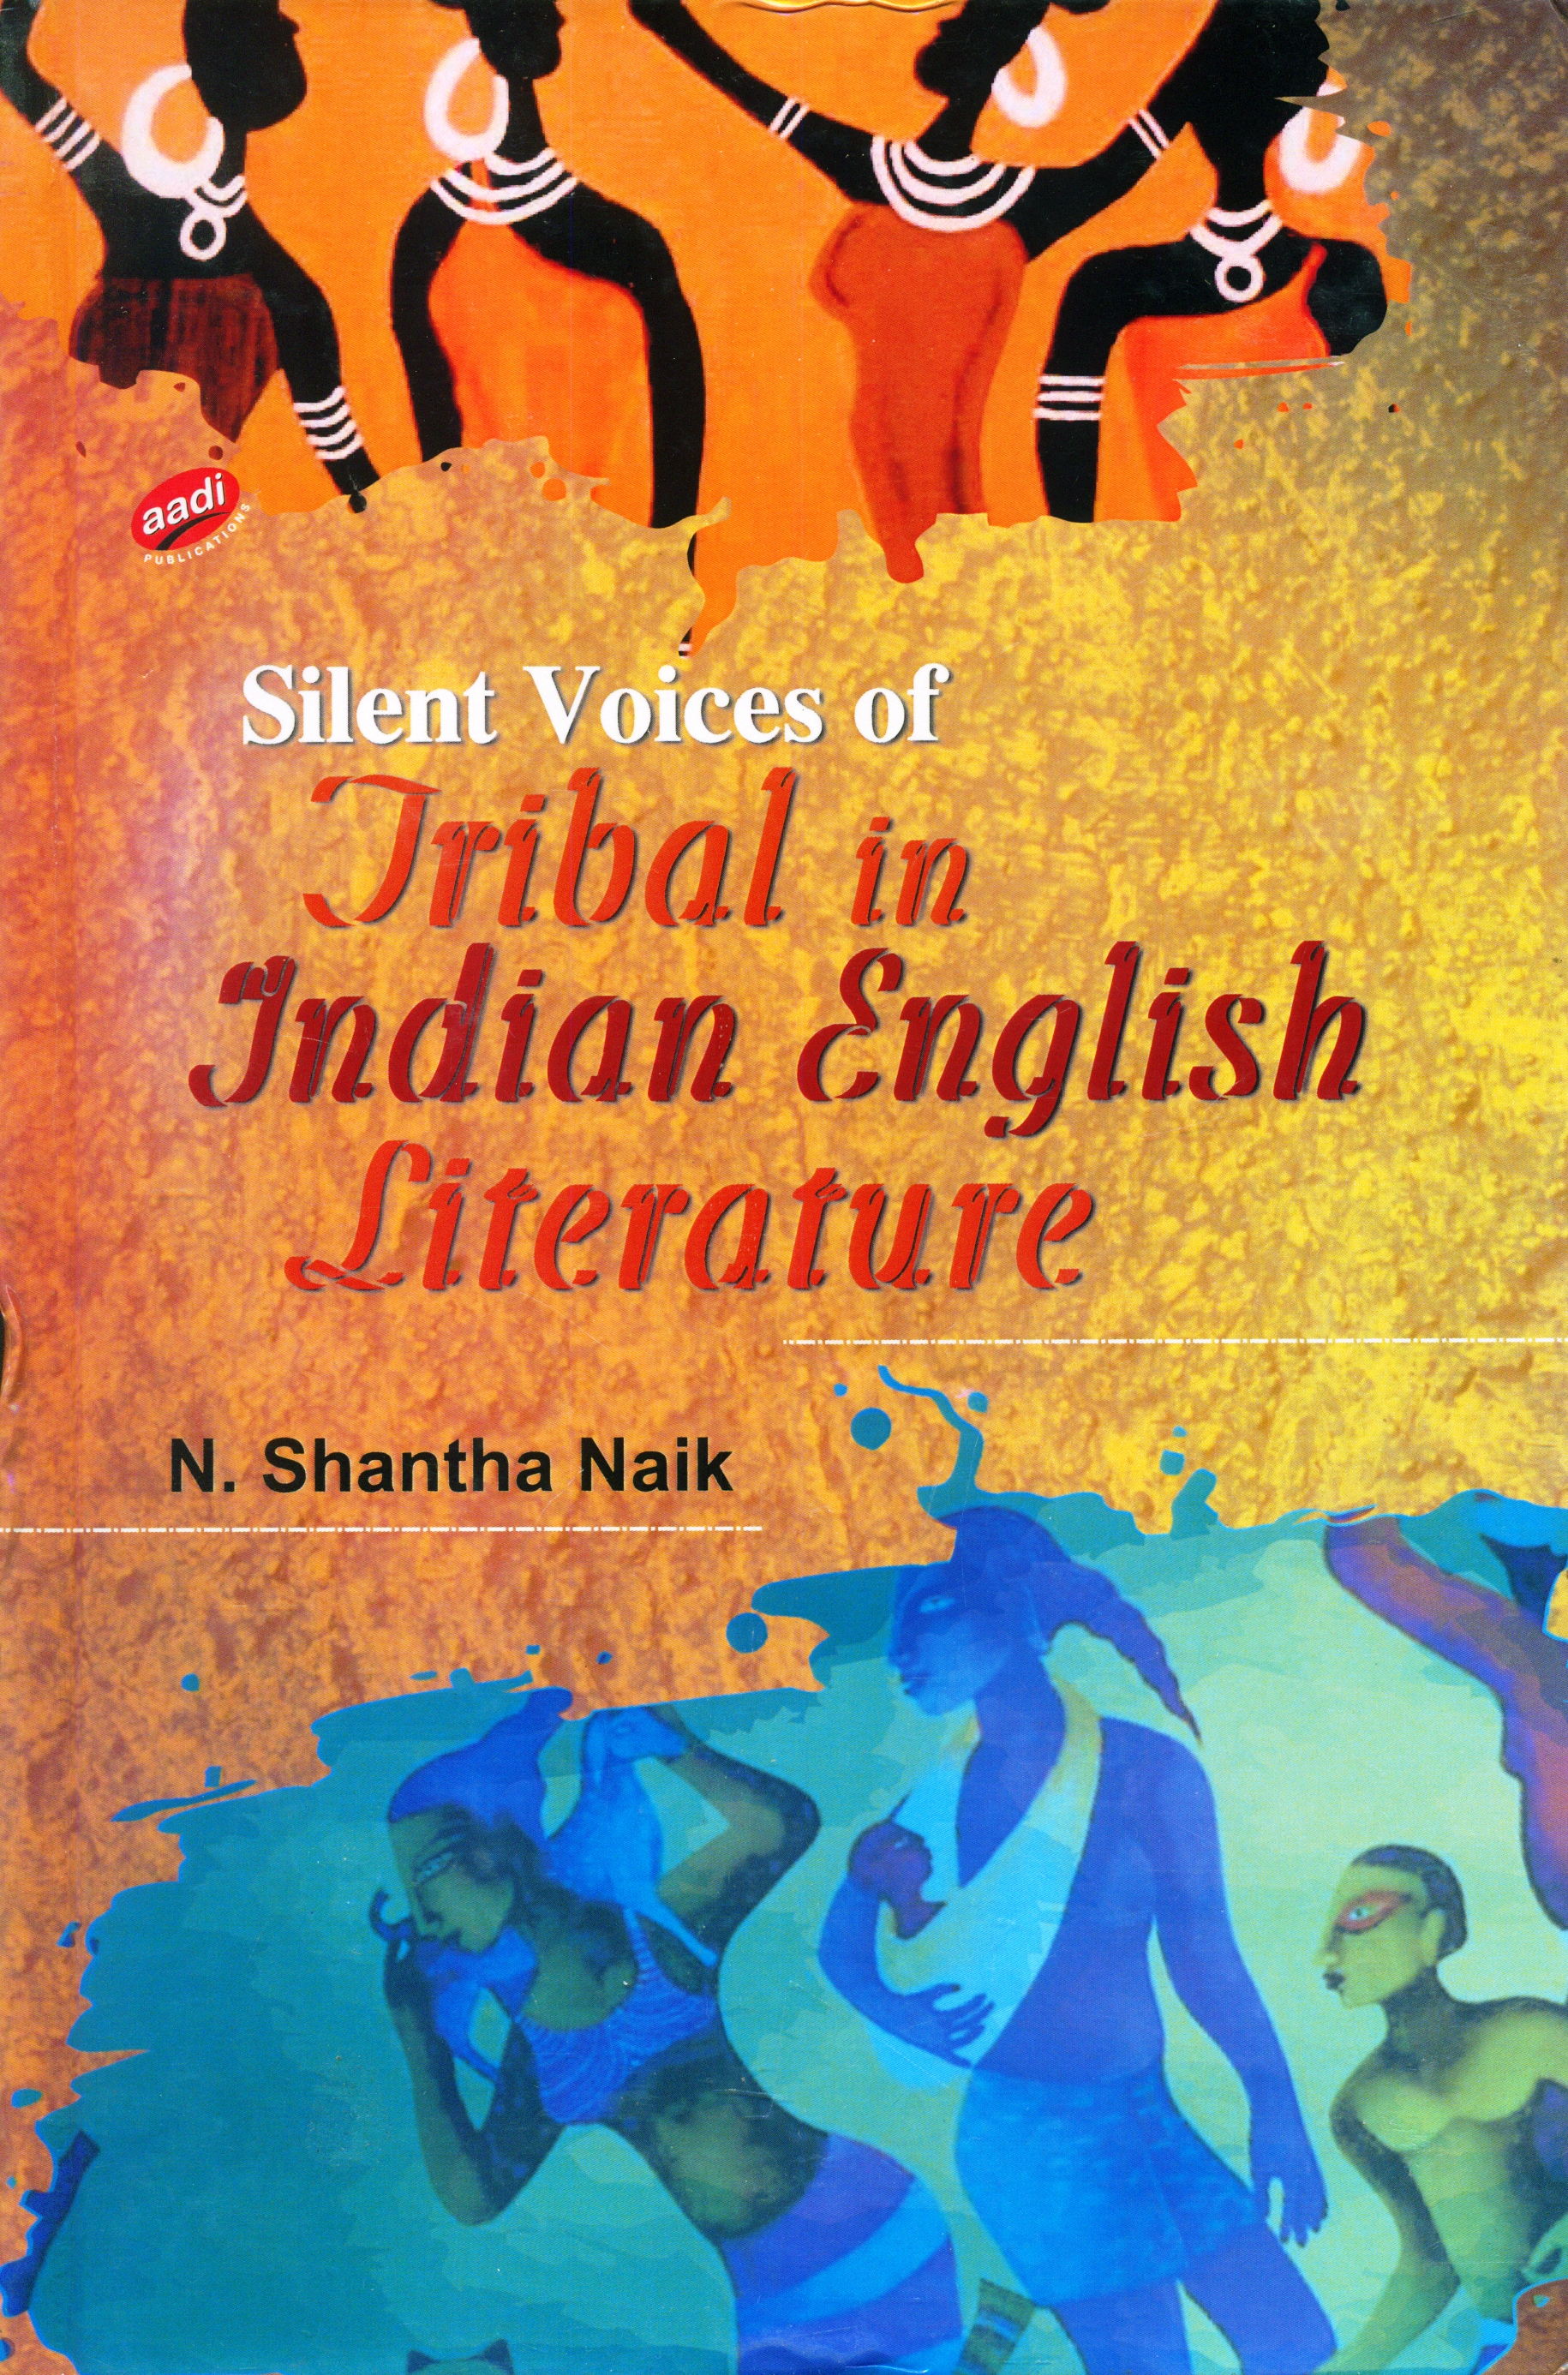 Silent voices of tribal in Indian English literature